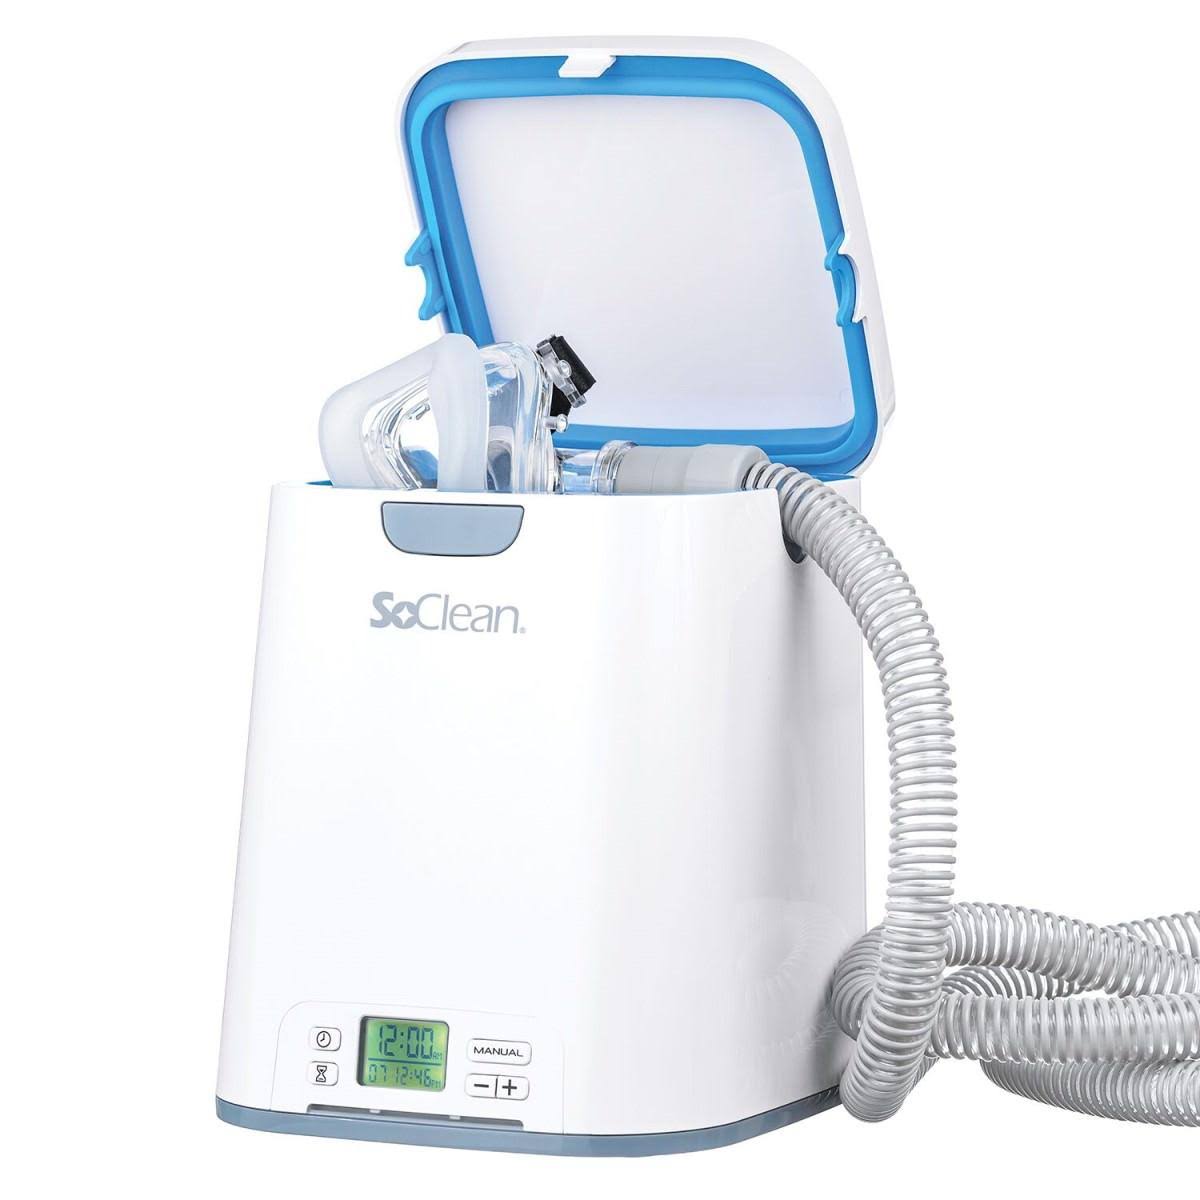 SoClean CPAP Cleaner and Sanitizer